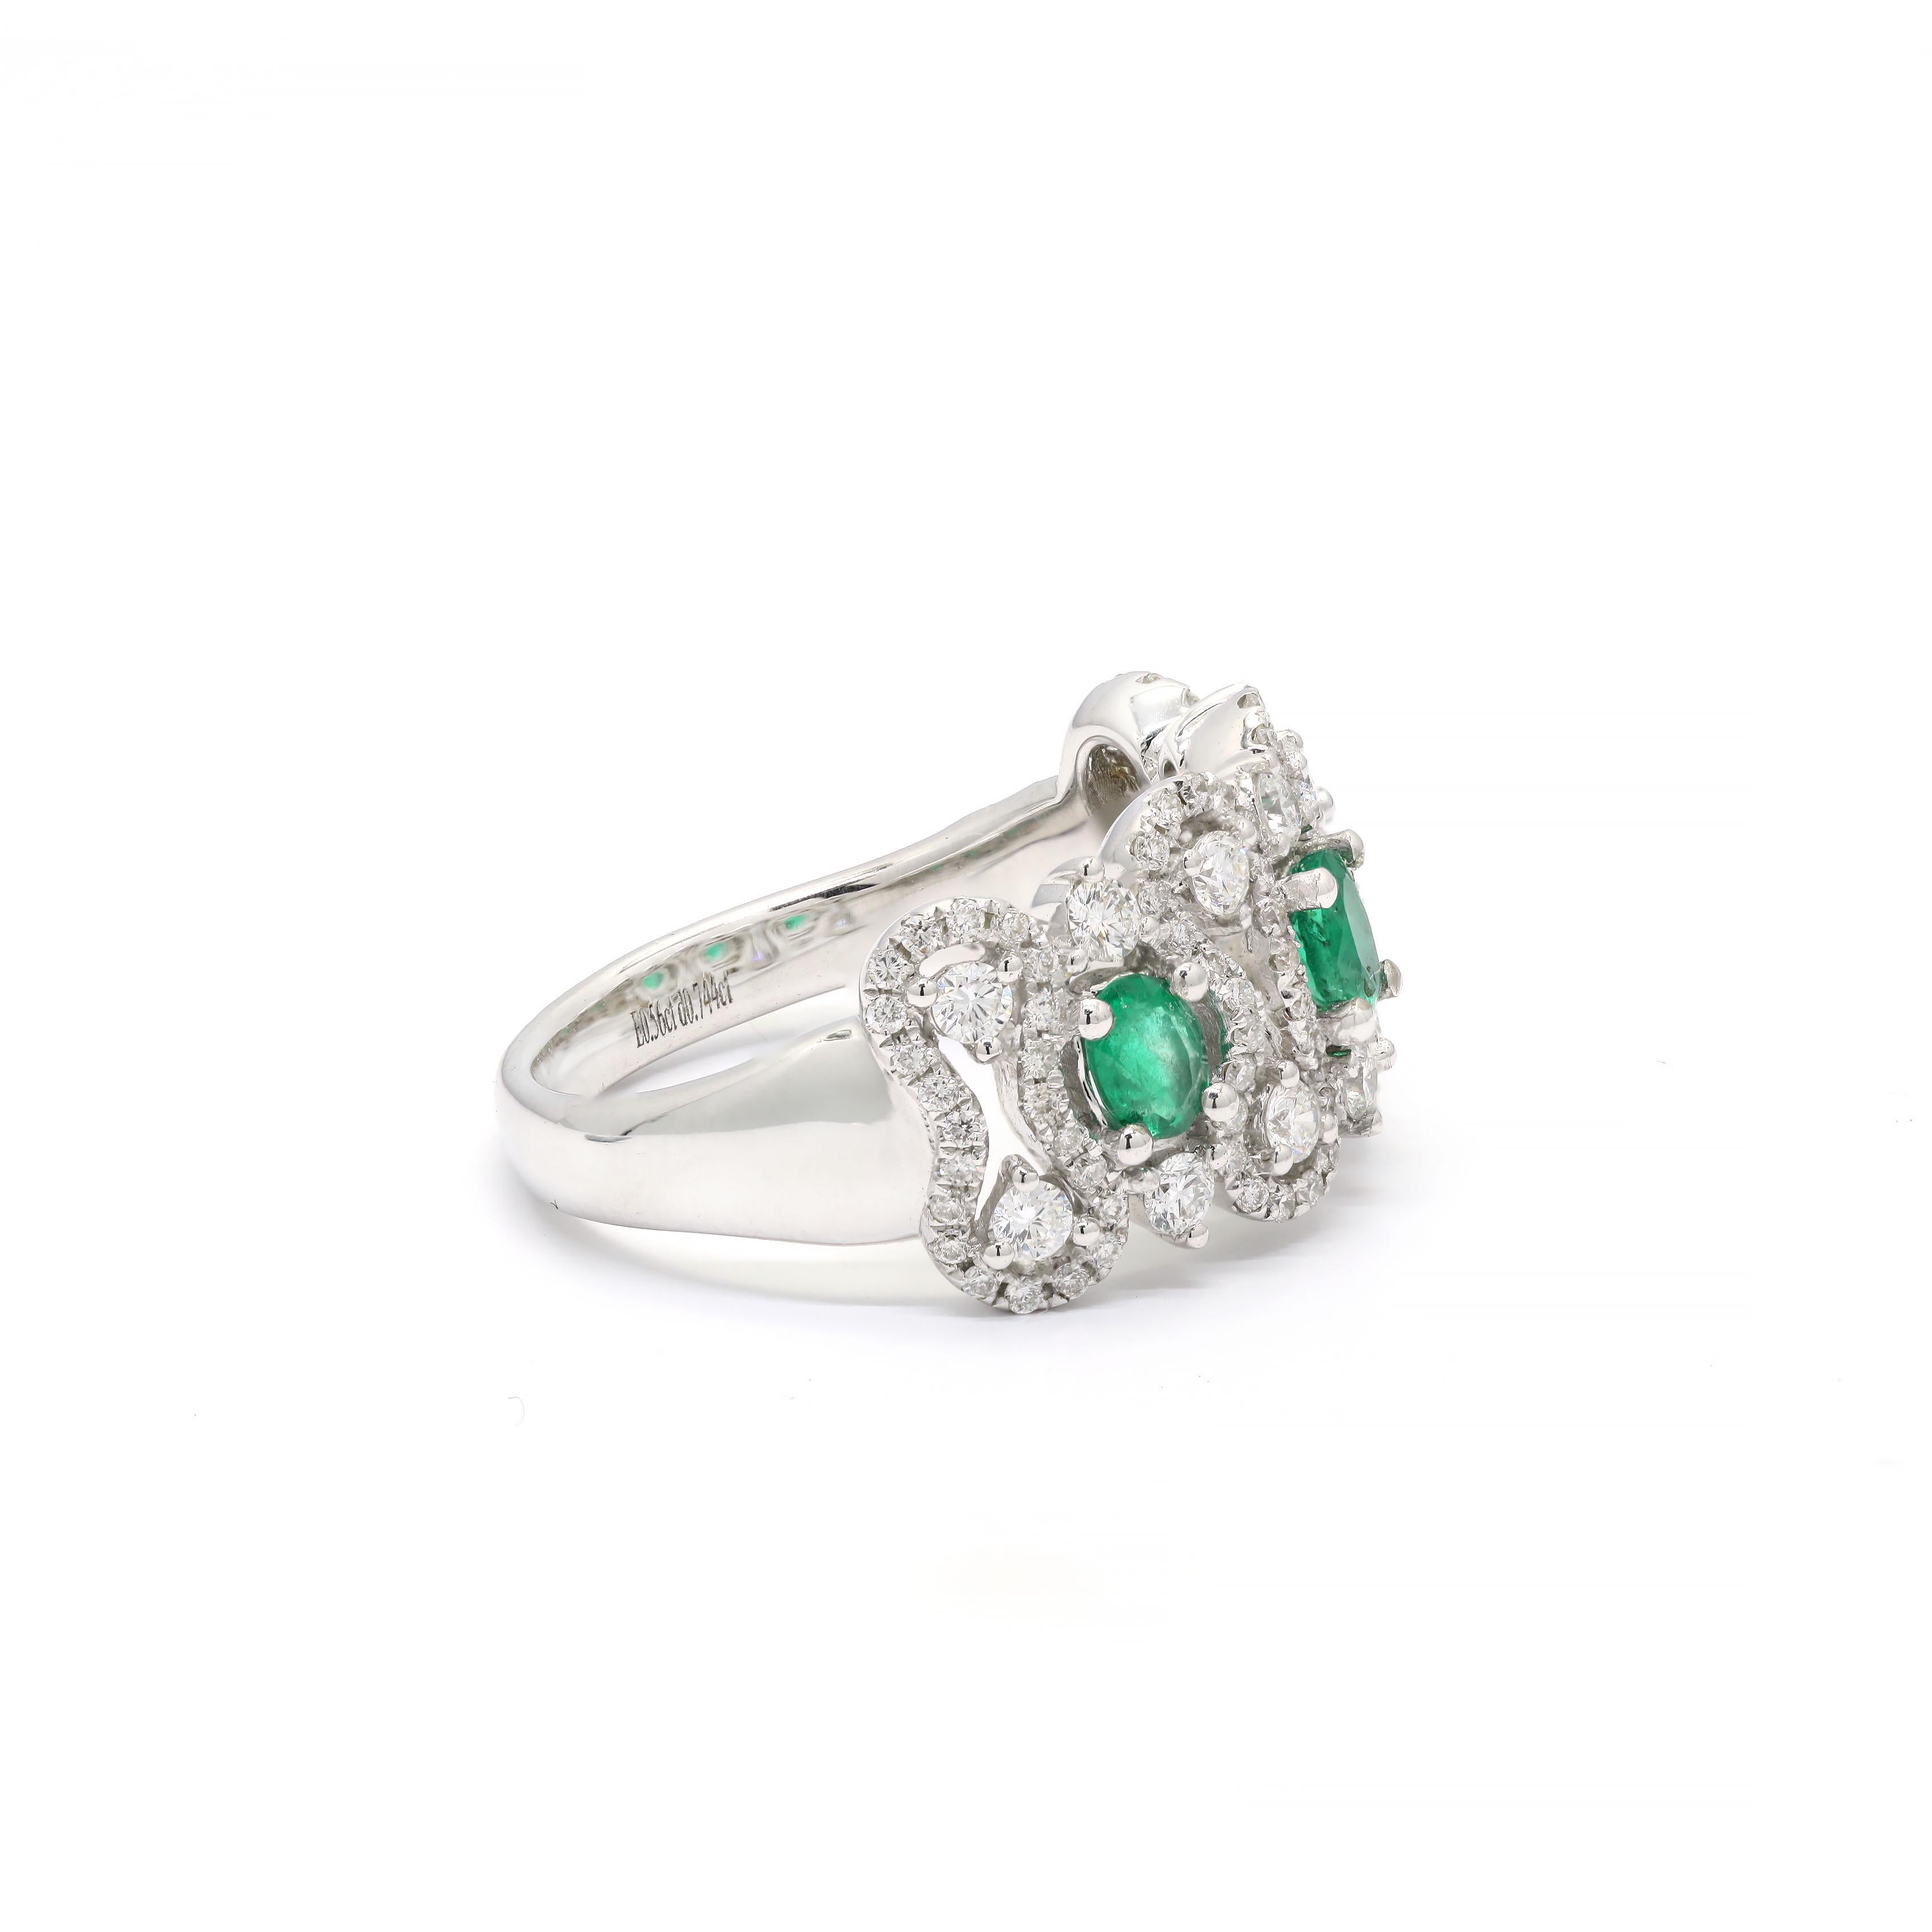 For Sale:   Diamond and Natural Emerald Engagement Band Ring in 14k Solid White Gold 3